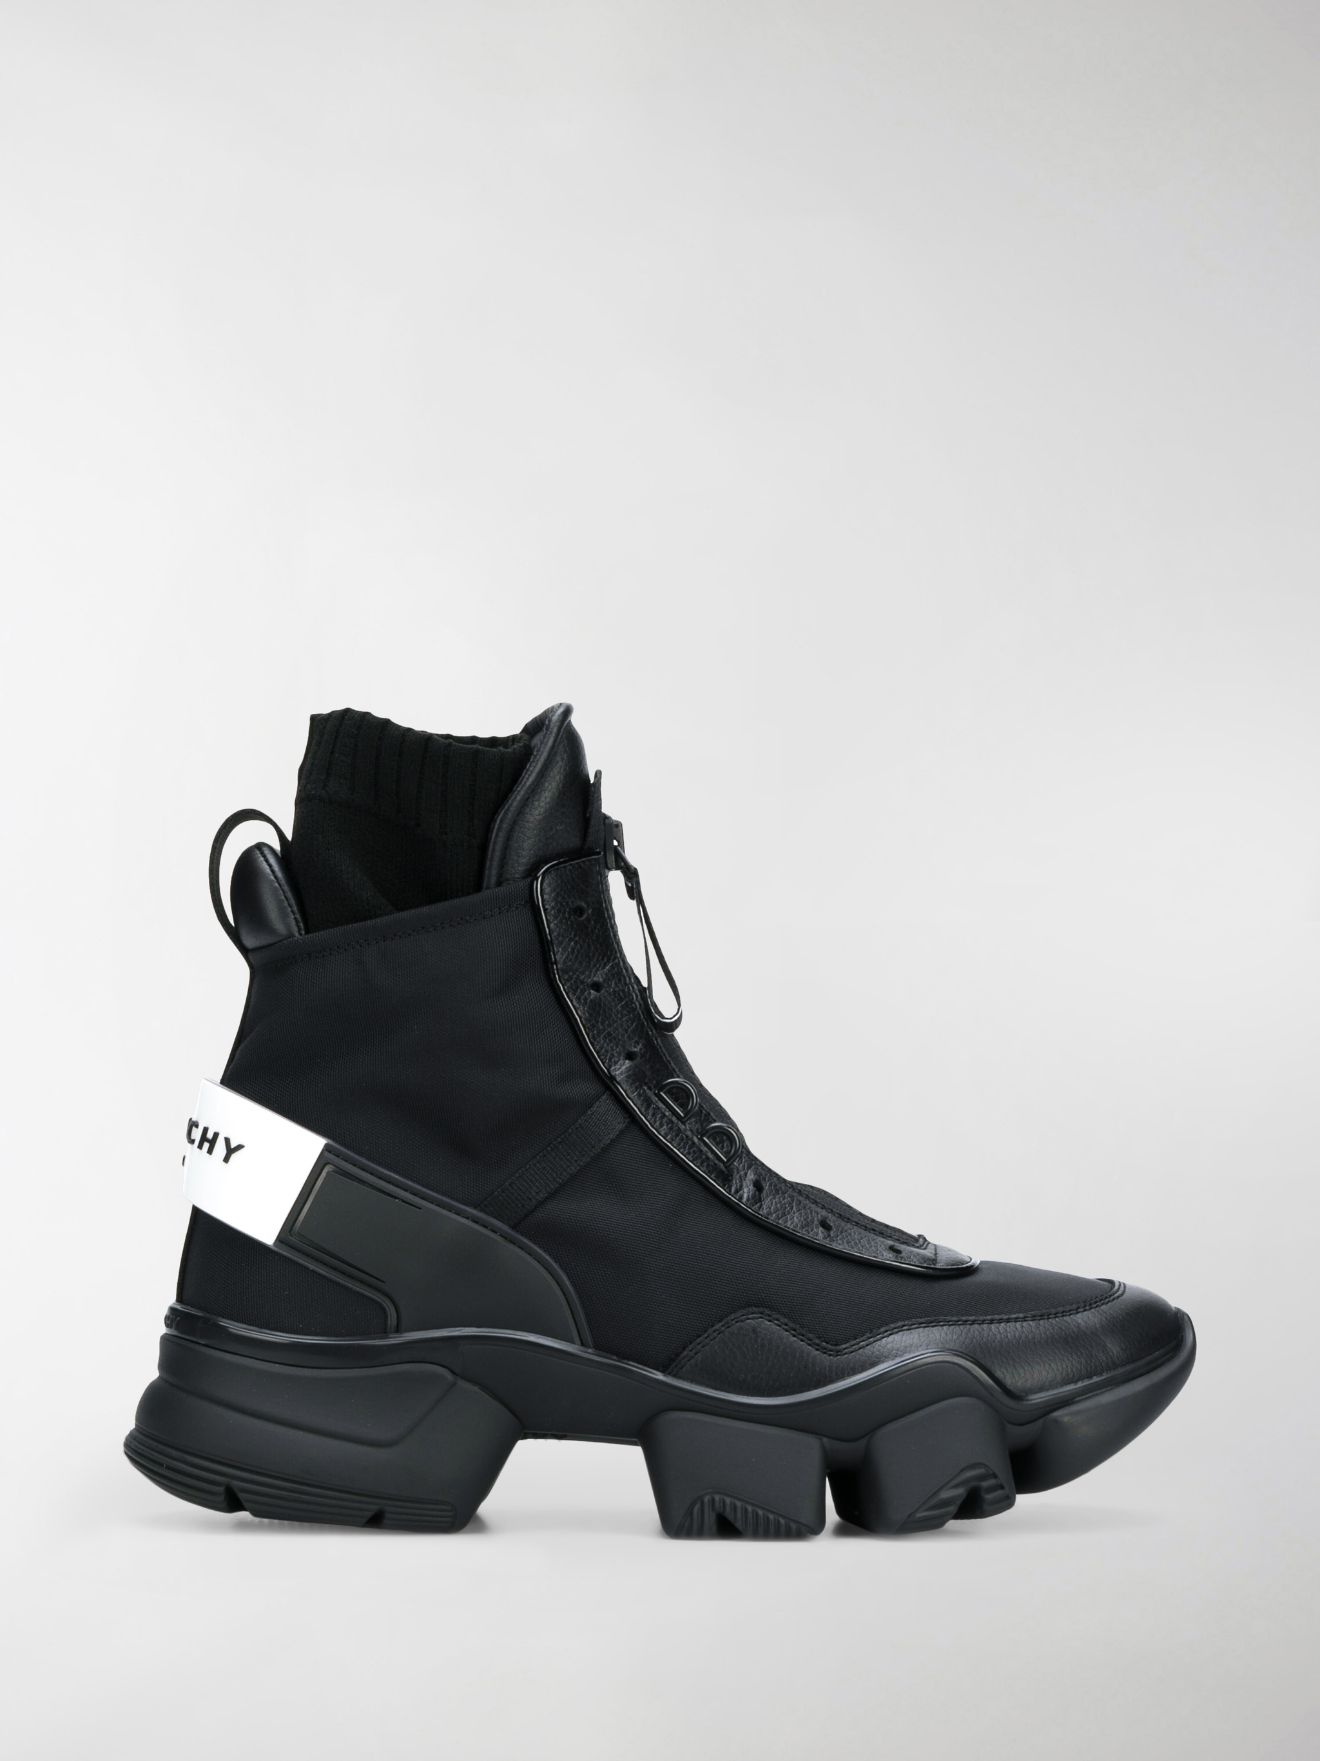 Givenchy Jaw high sneakers black | MODES